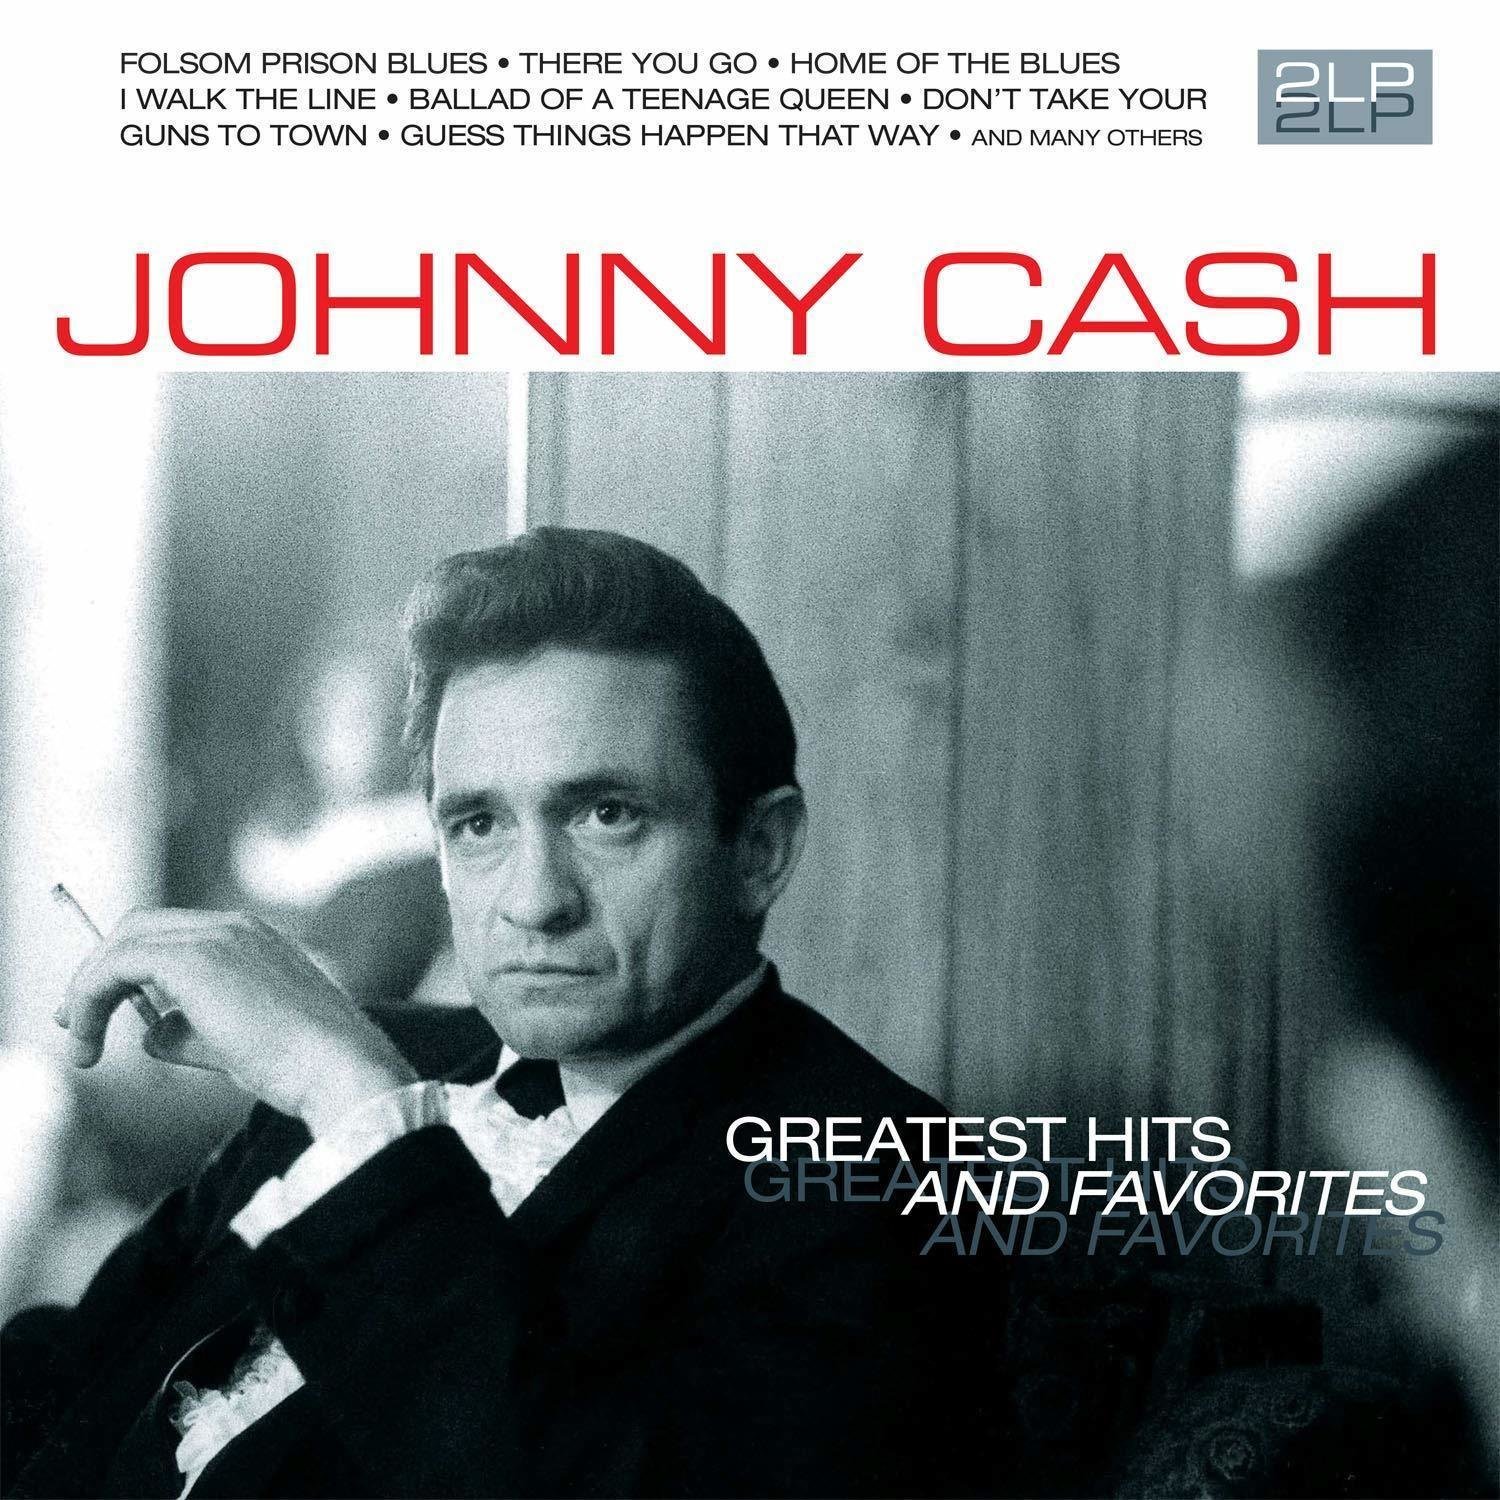 Johnny Cash Greatest Hits and Favorites (2 LP) Johnny Cash